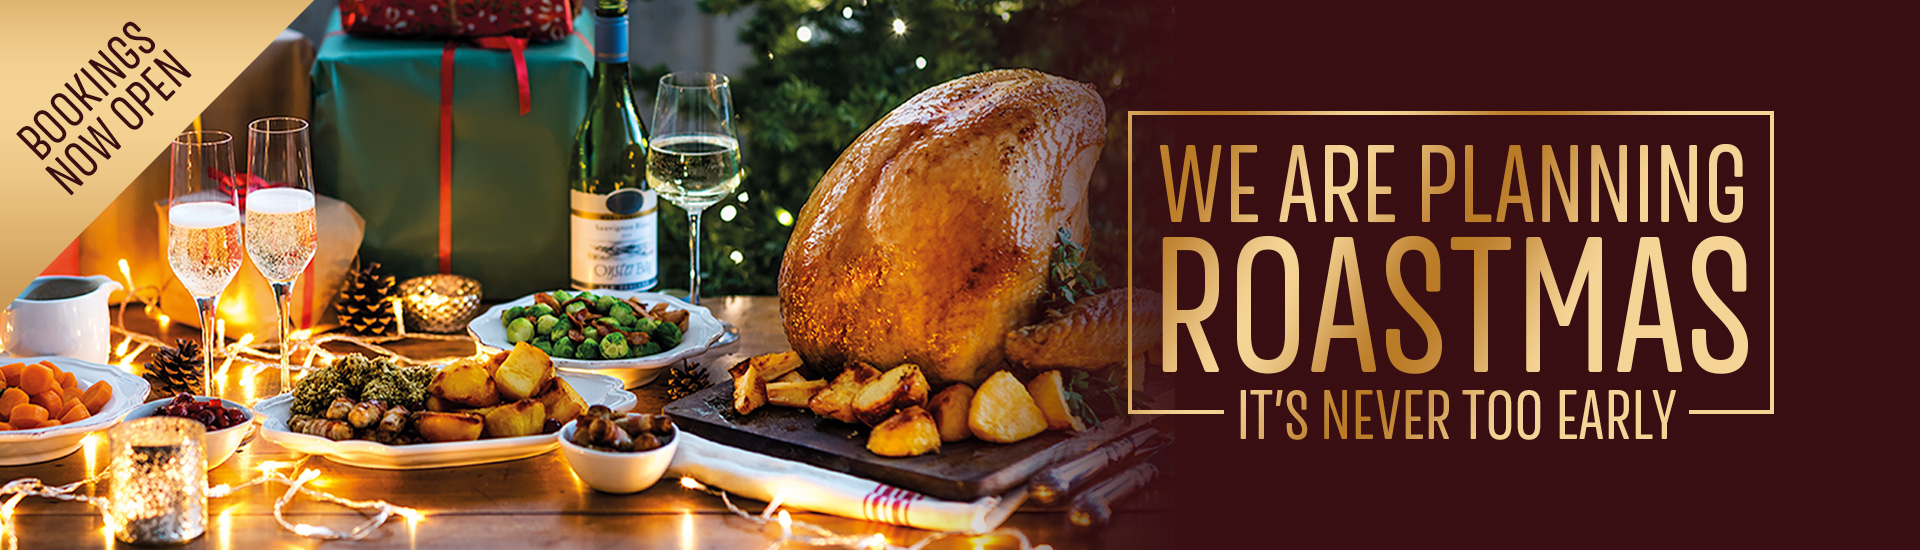 Christmas 2022 at your local Toby Carvery Endon | Home of the Roast